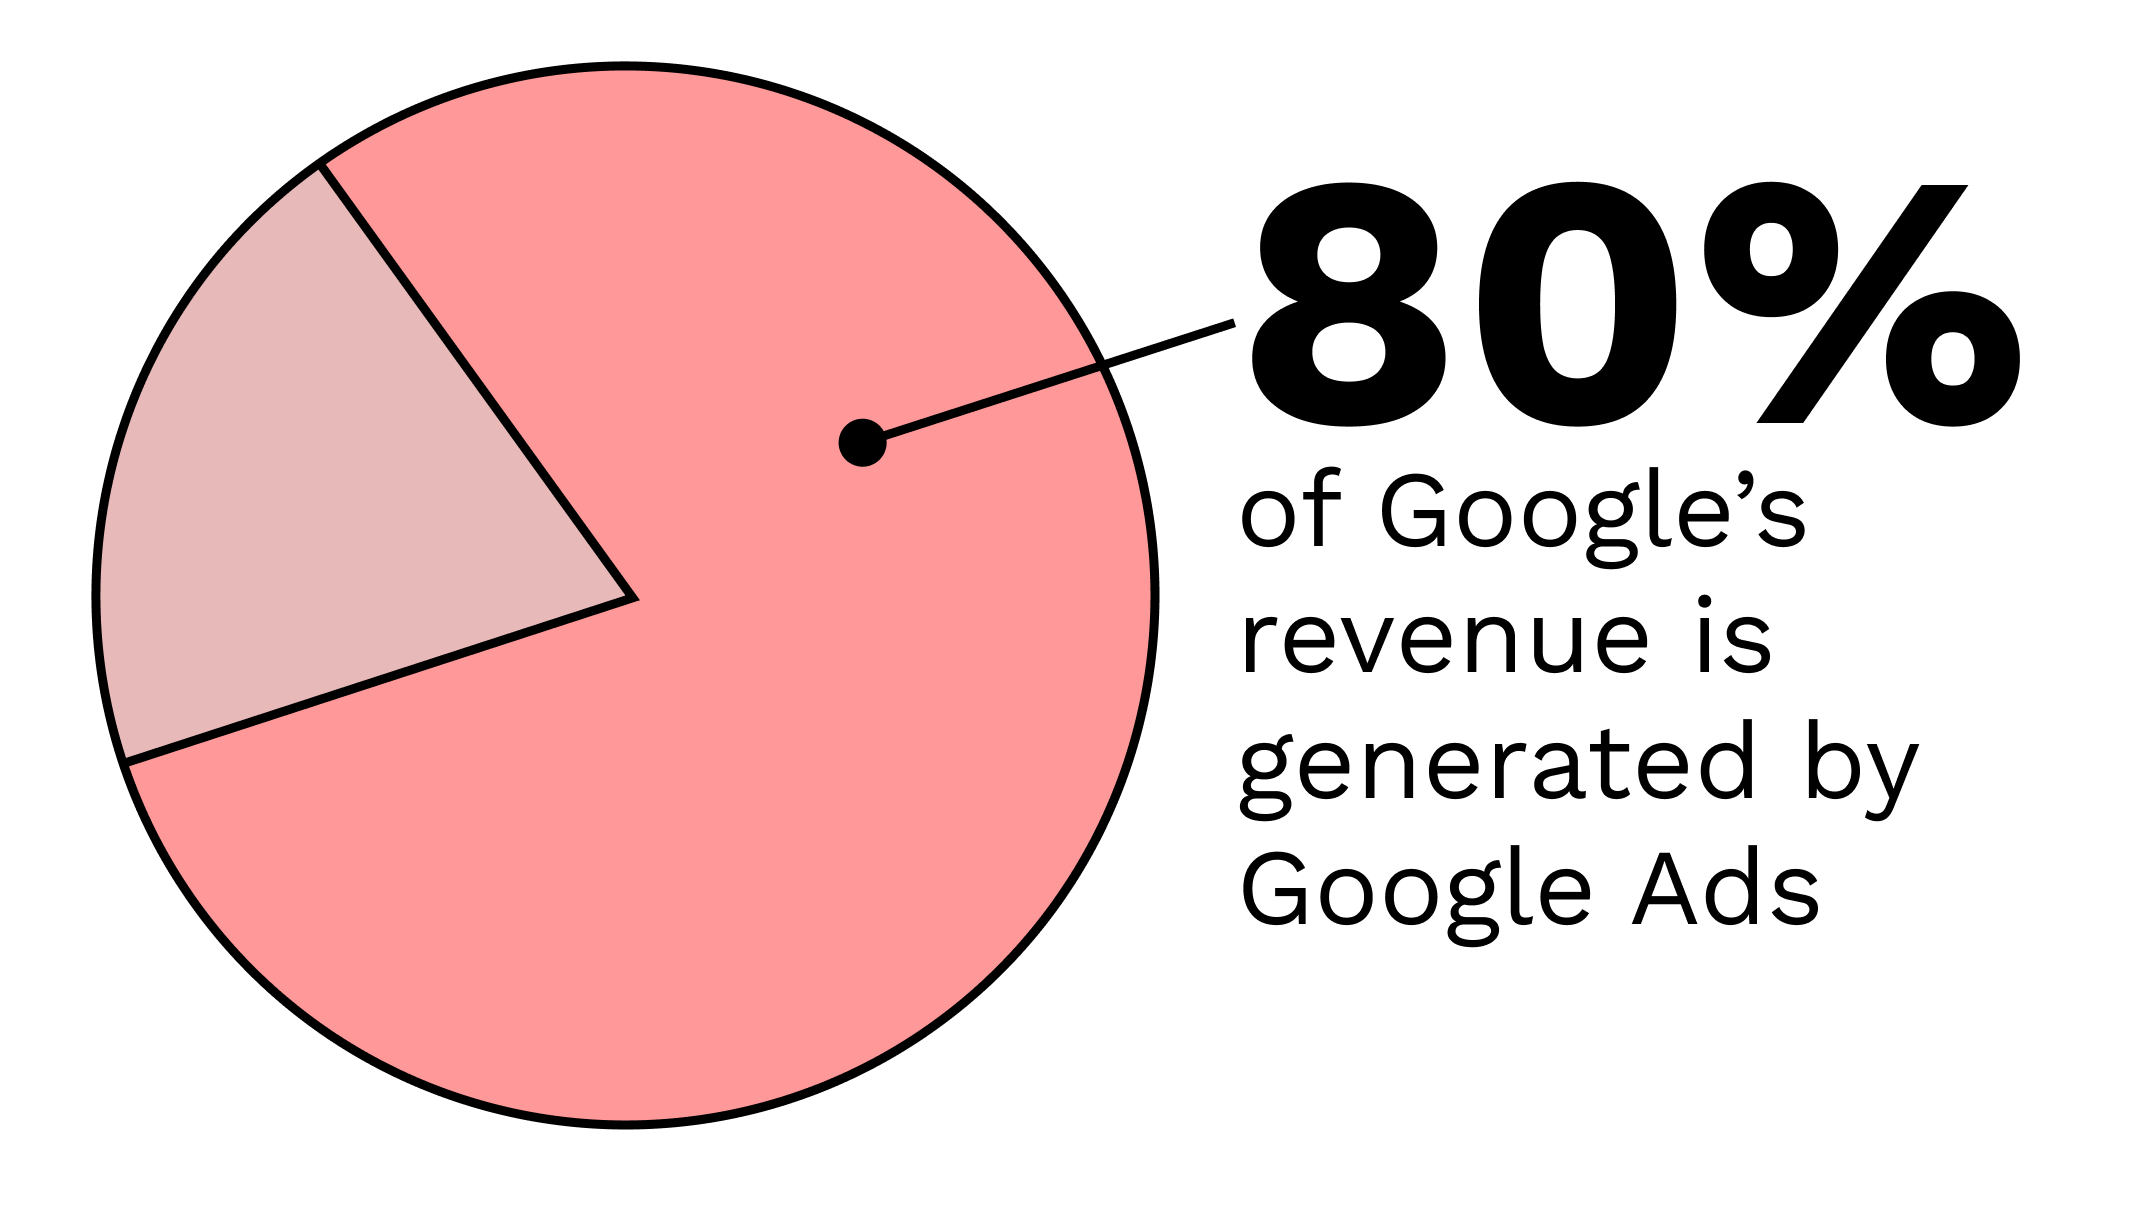 80% of Google's revenue comes from Google Ads